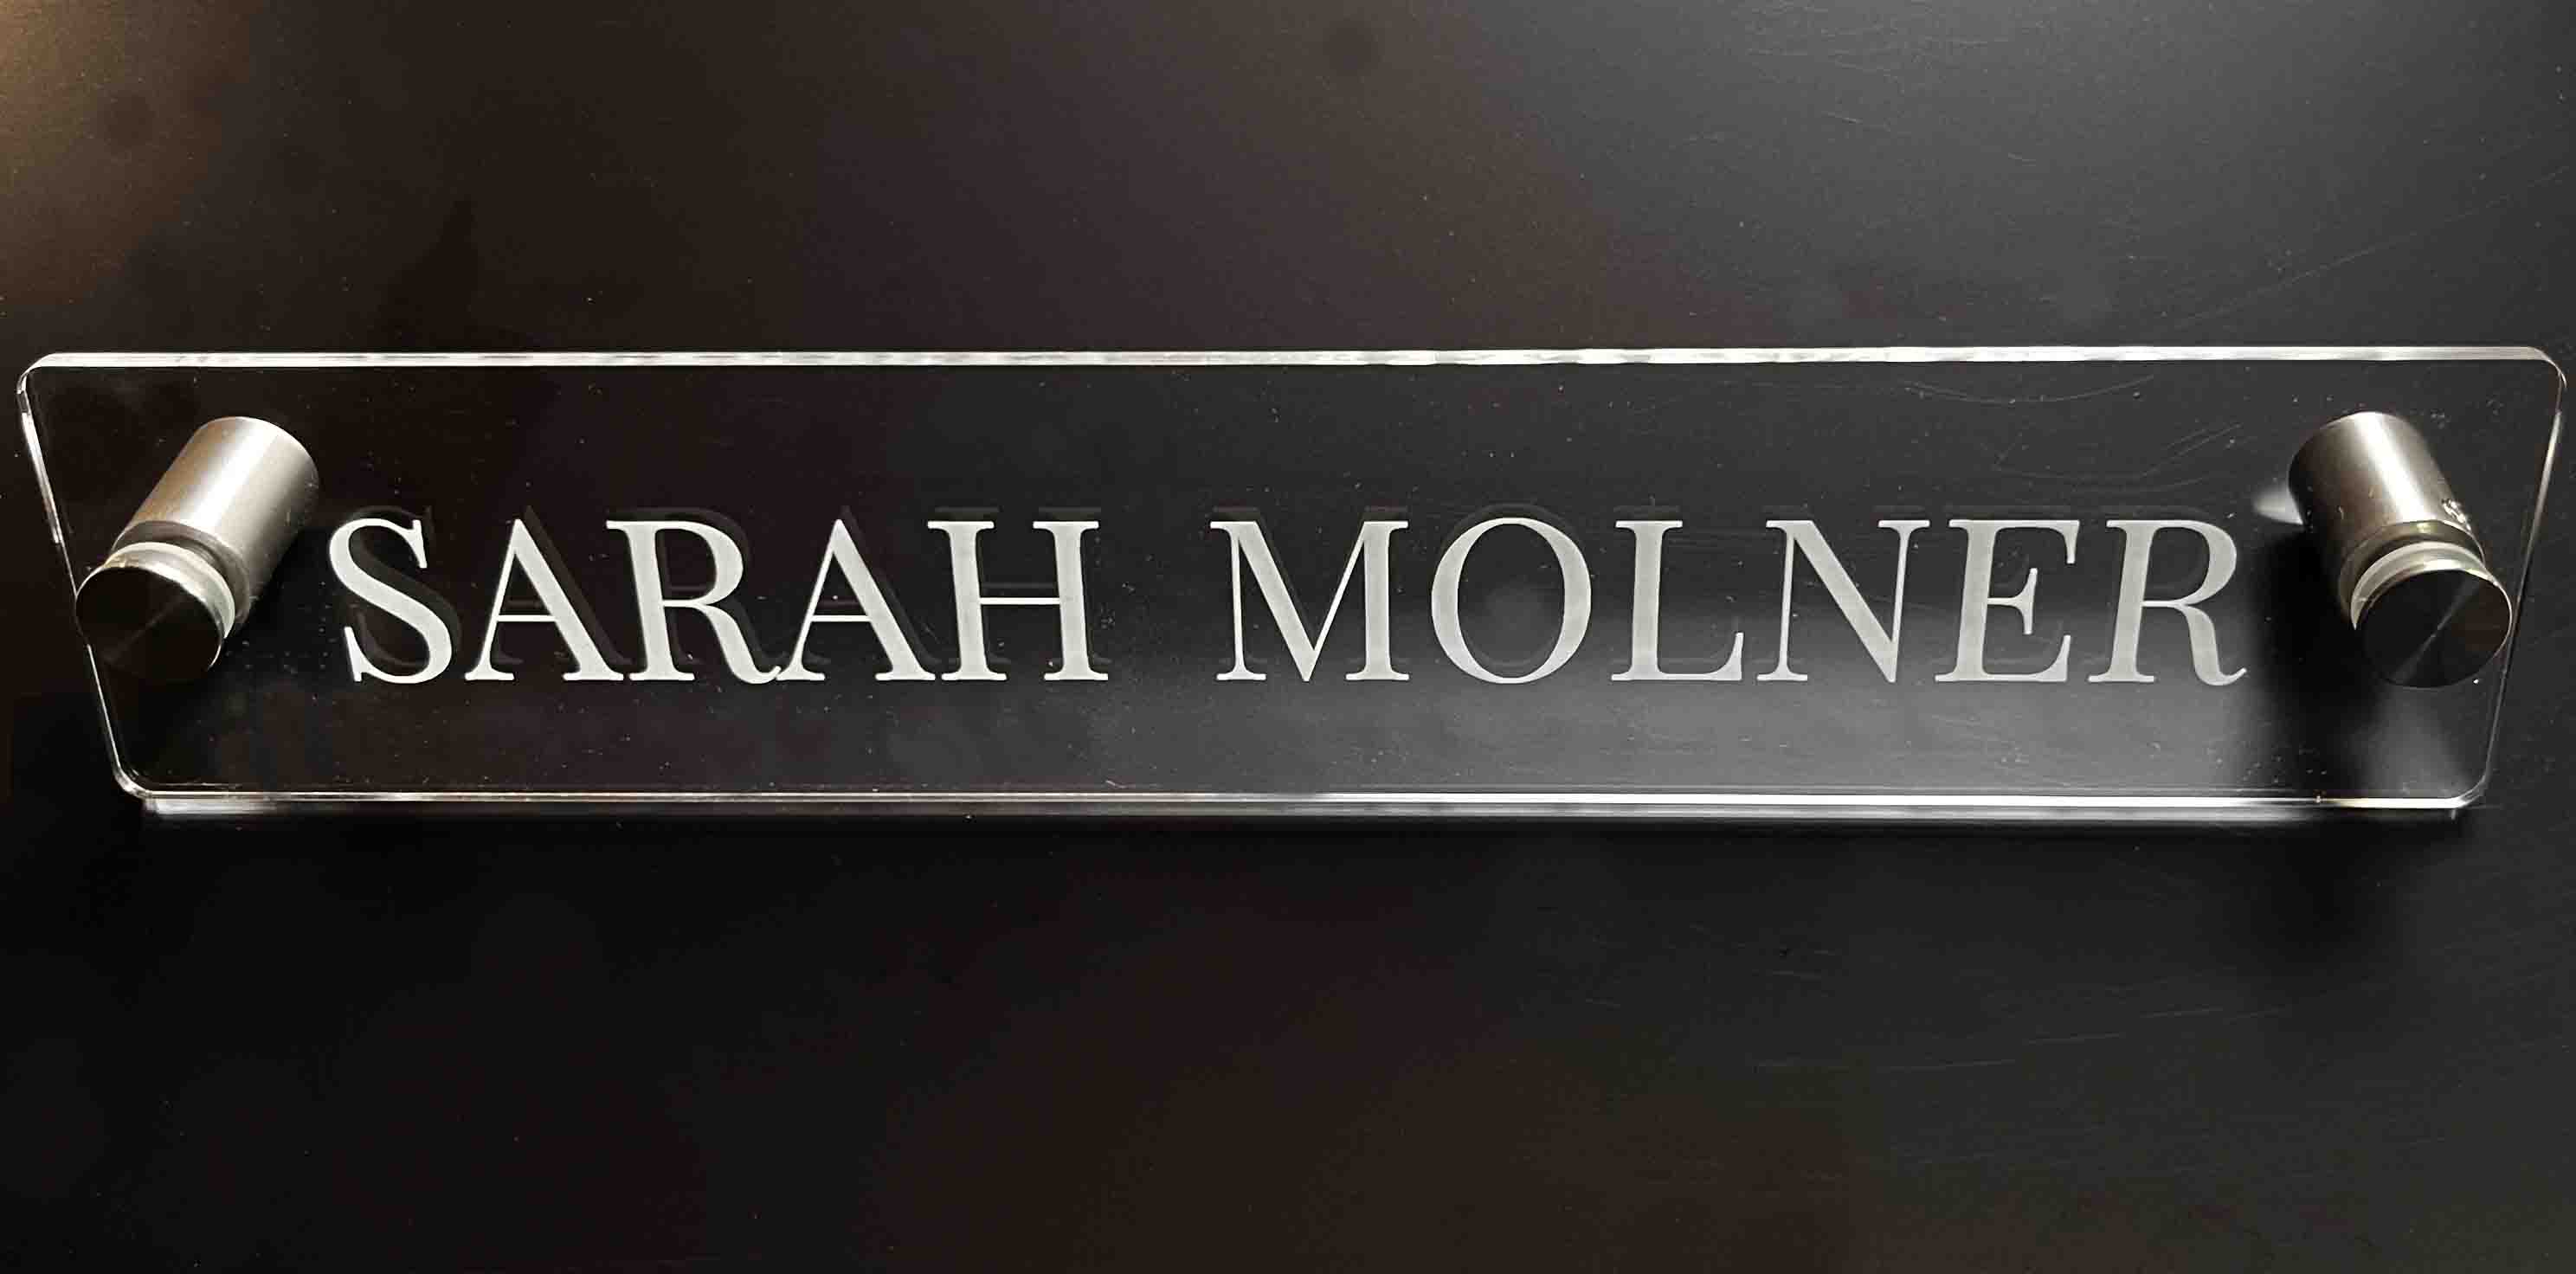 Acrylic Name Plate with Standoffs